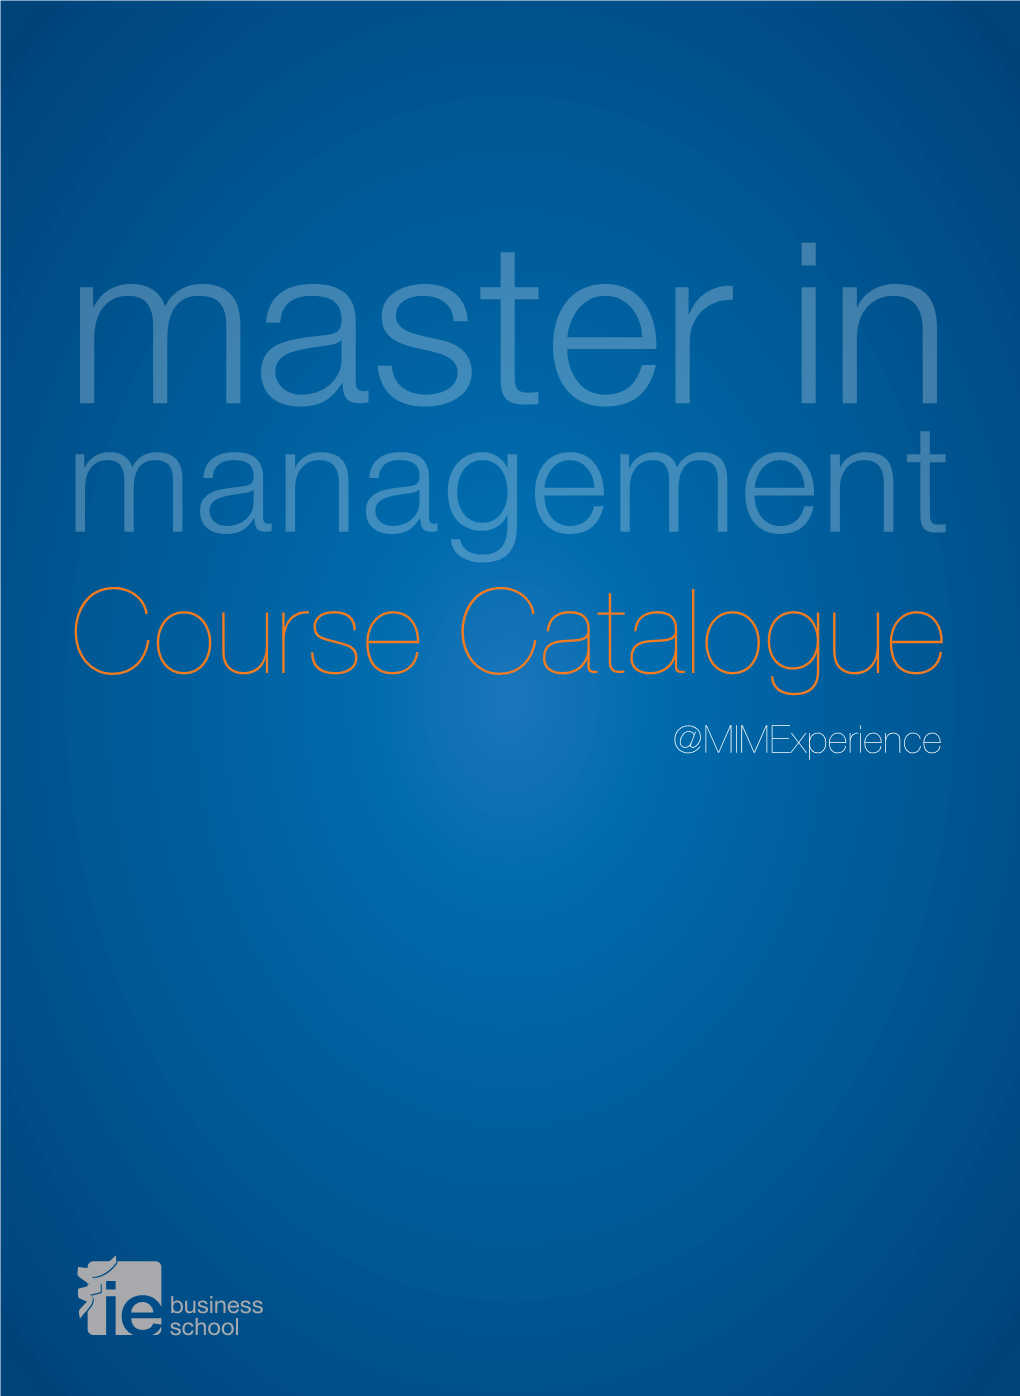 Course Catalogue @Mimexperience